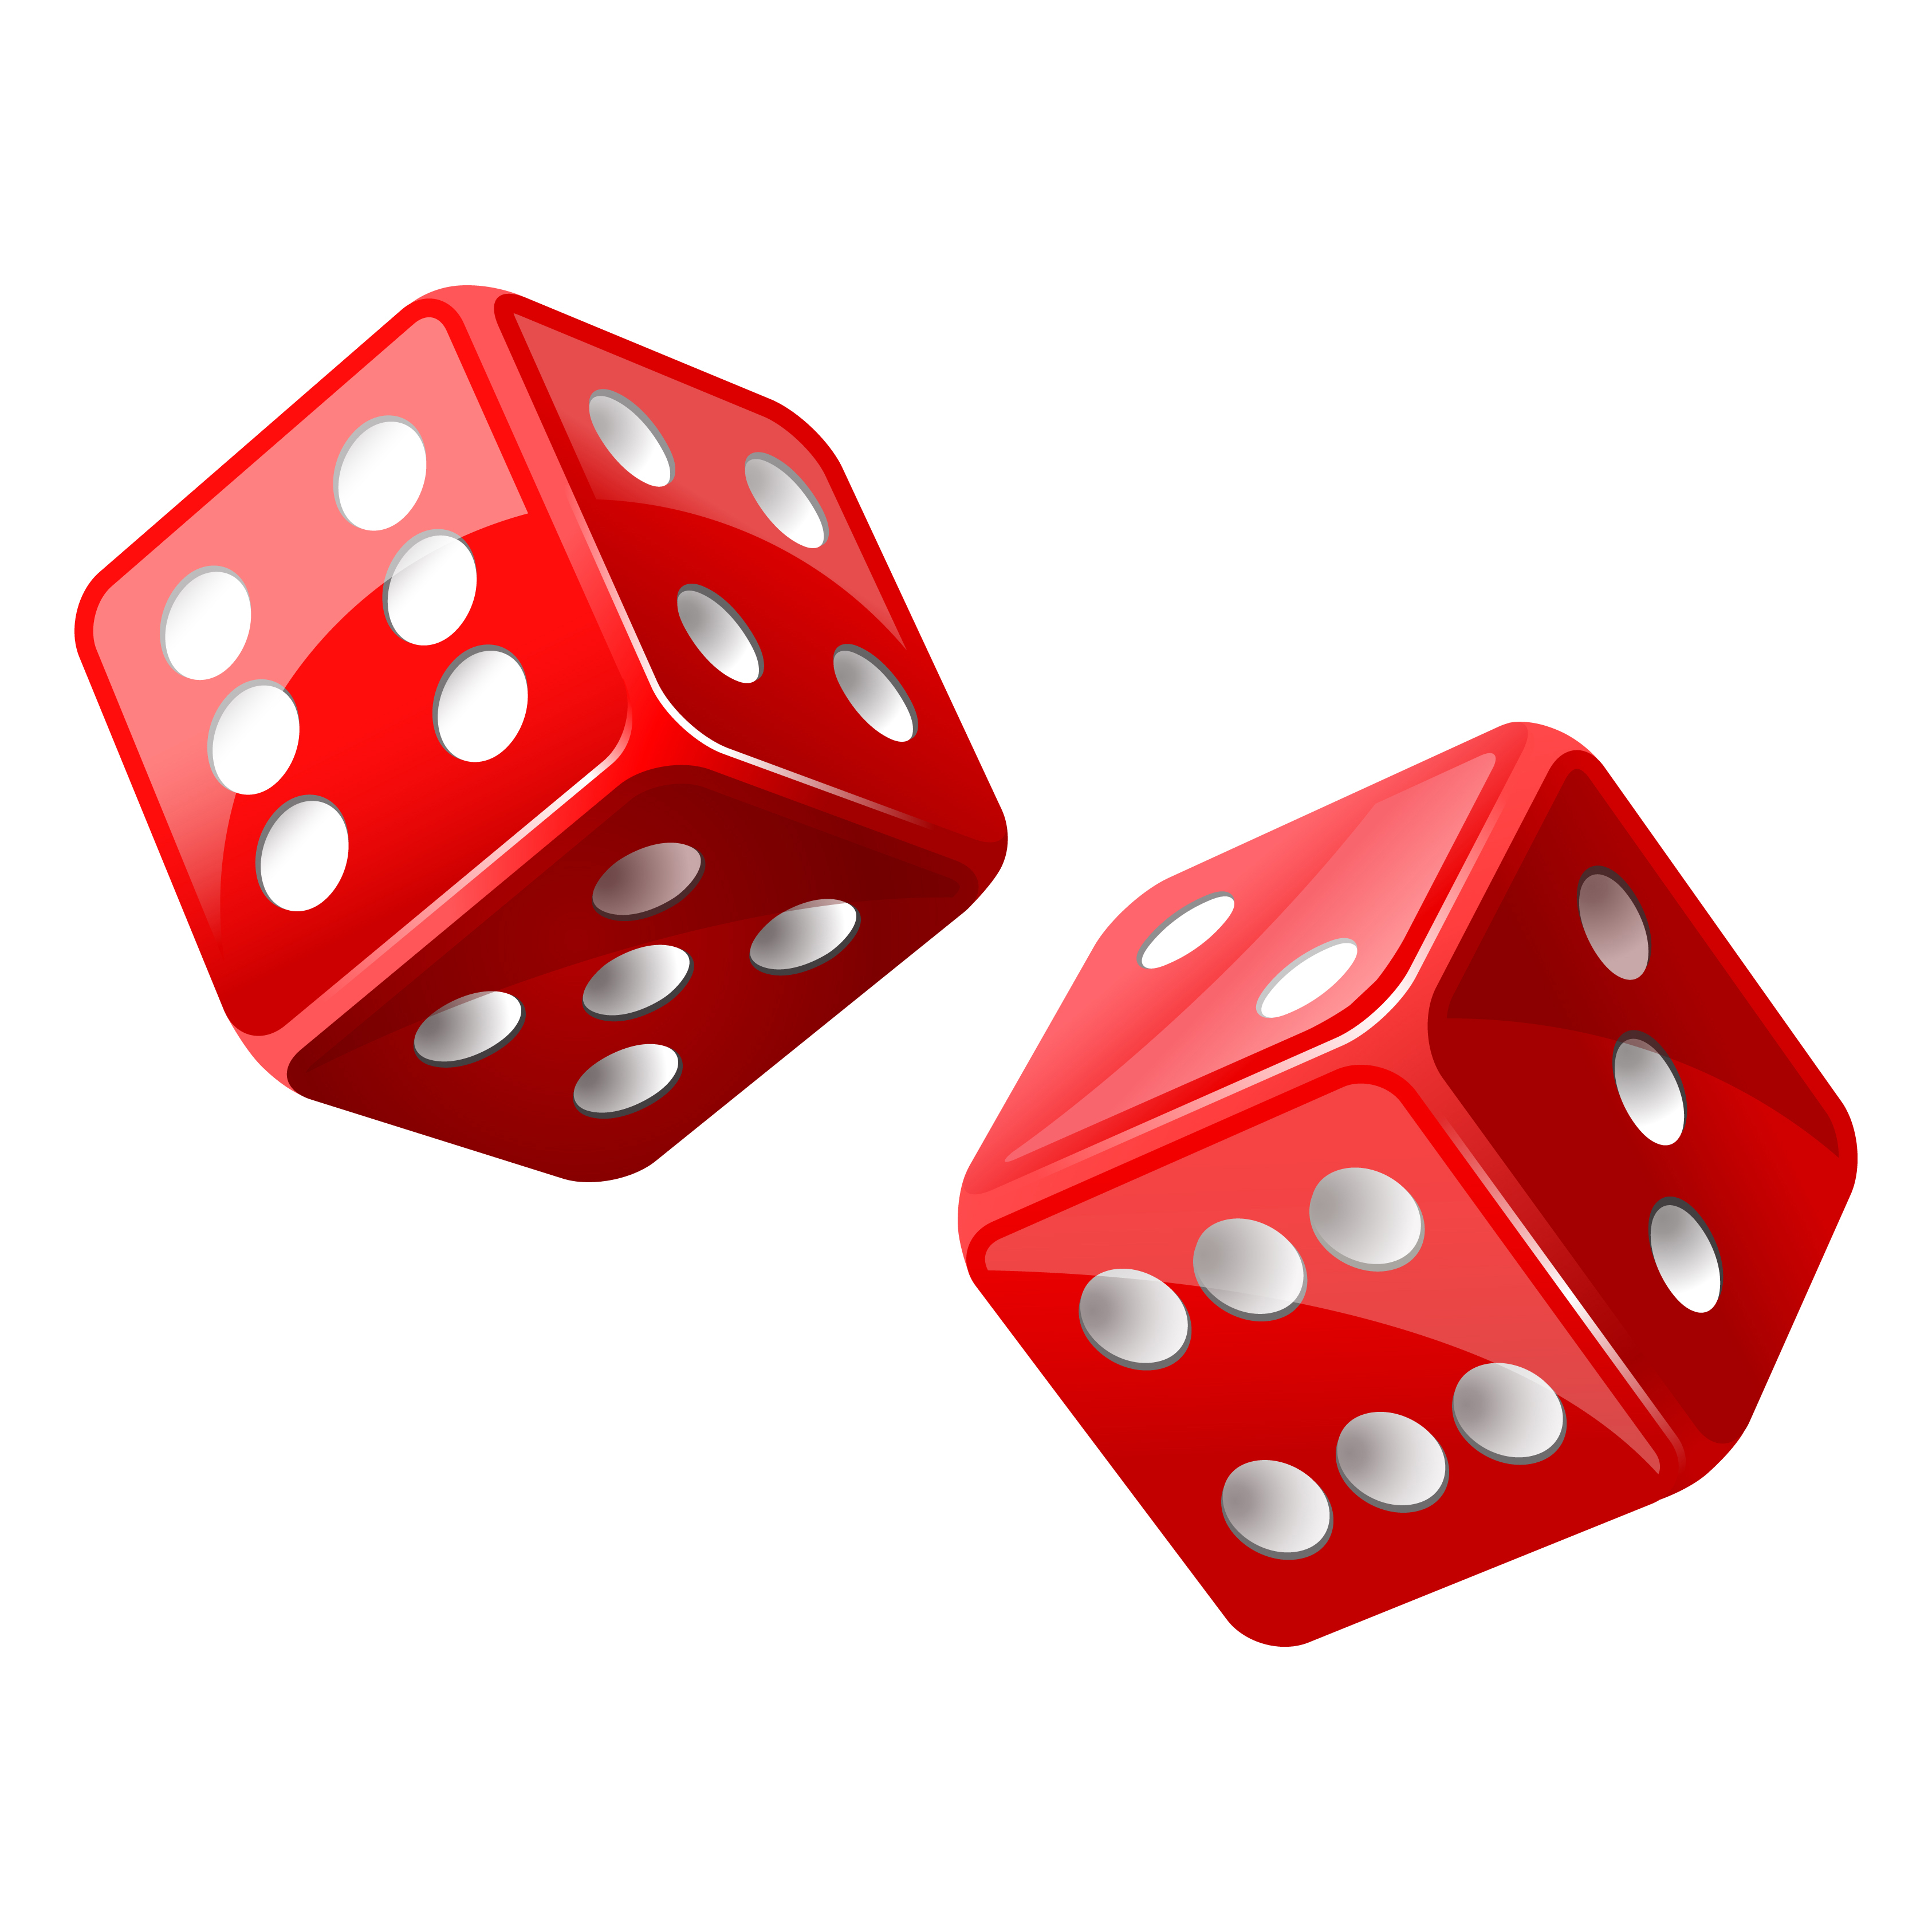 Red dice clipart